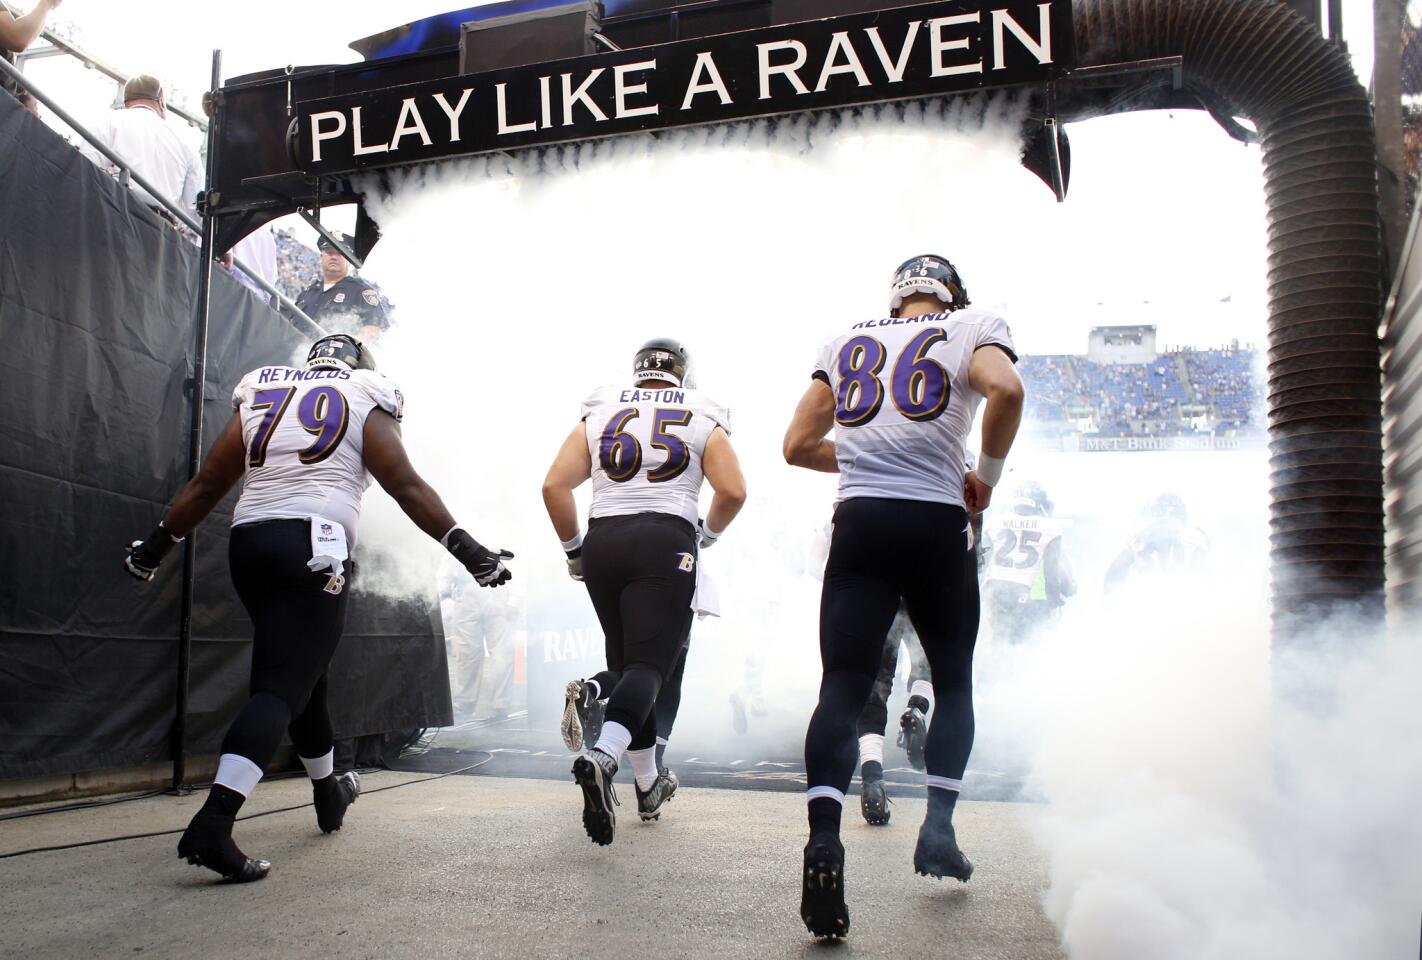 Ravens defensive tackle Micajah Reynolds (#79), defensive tackle Nick Easton (#65), and tight end Konrad Reuland (#86) run out to the field before a preseason exhibition game between the Ravens and New Orleans Saints at M&T Bank Stadium.